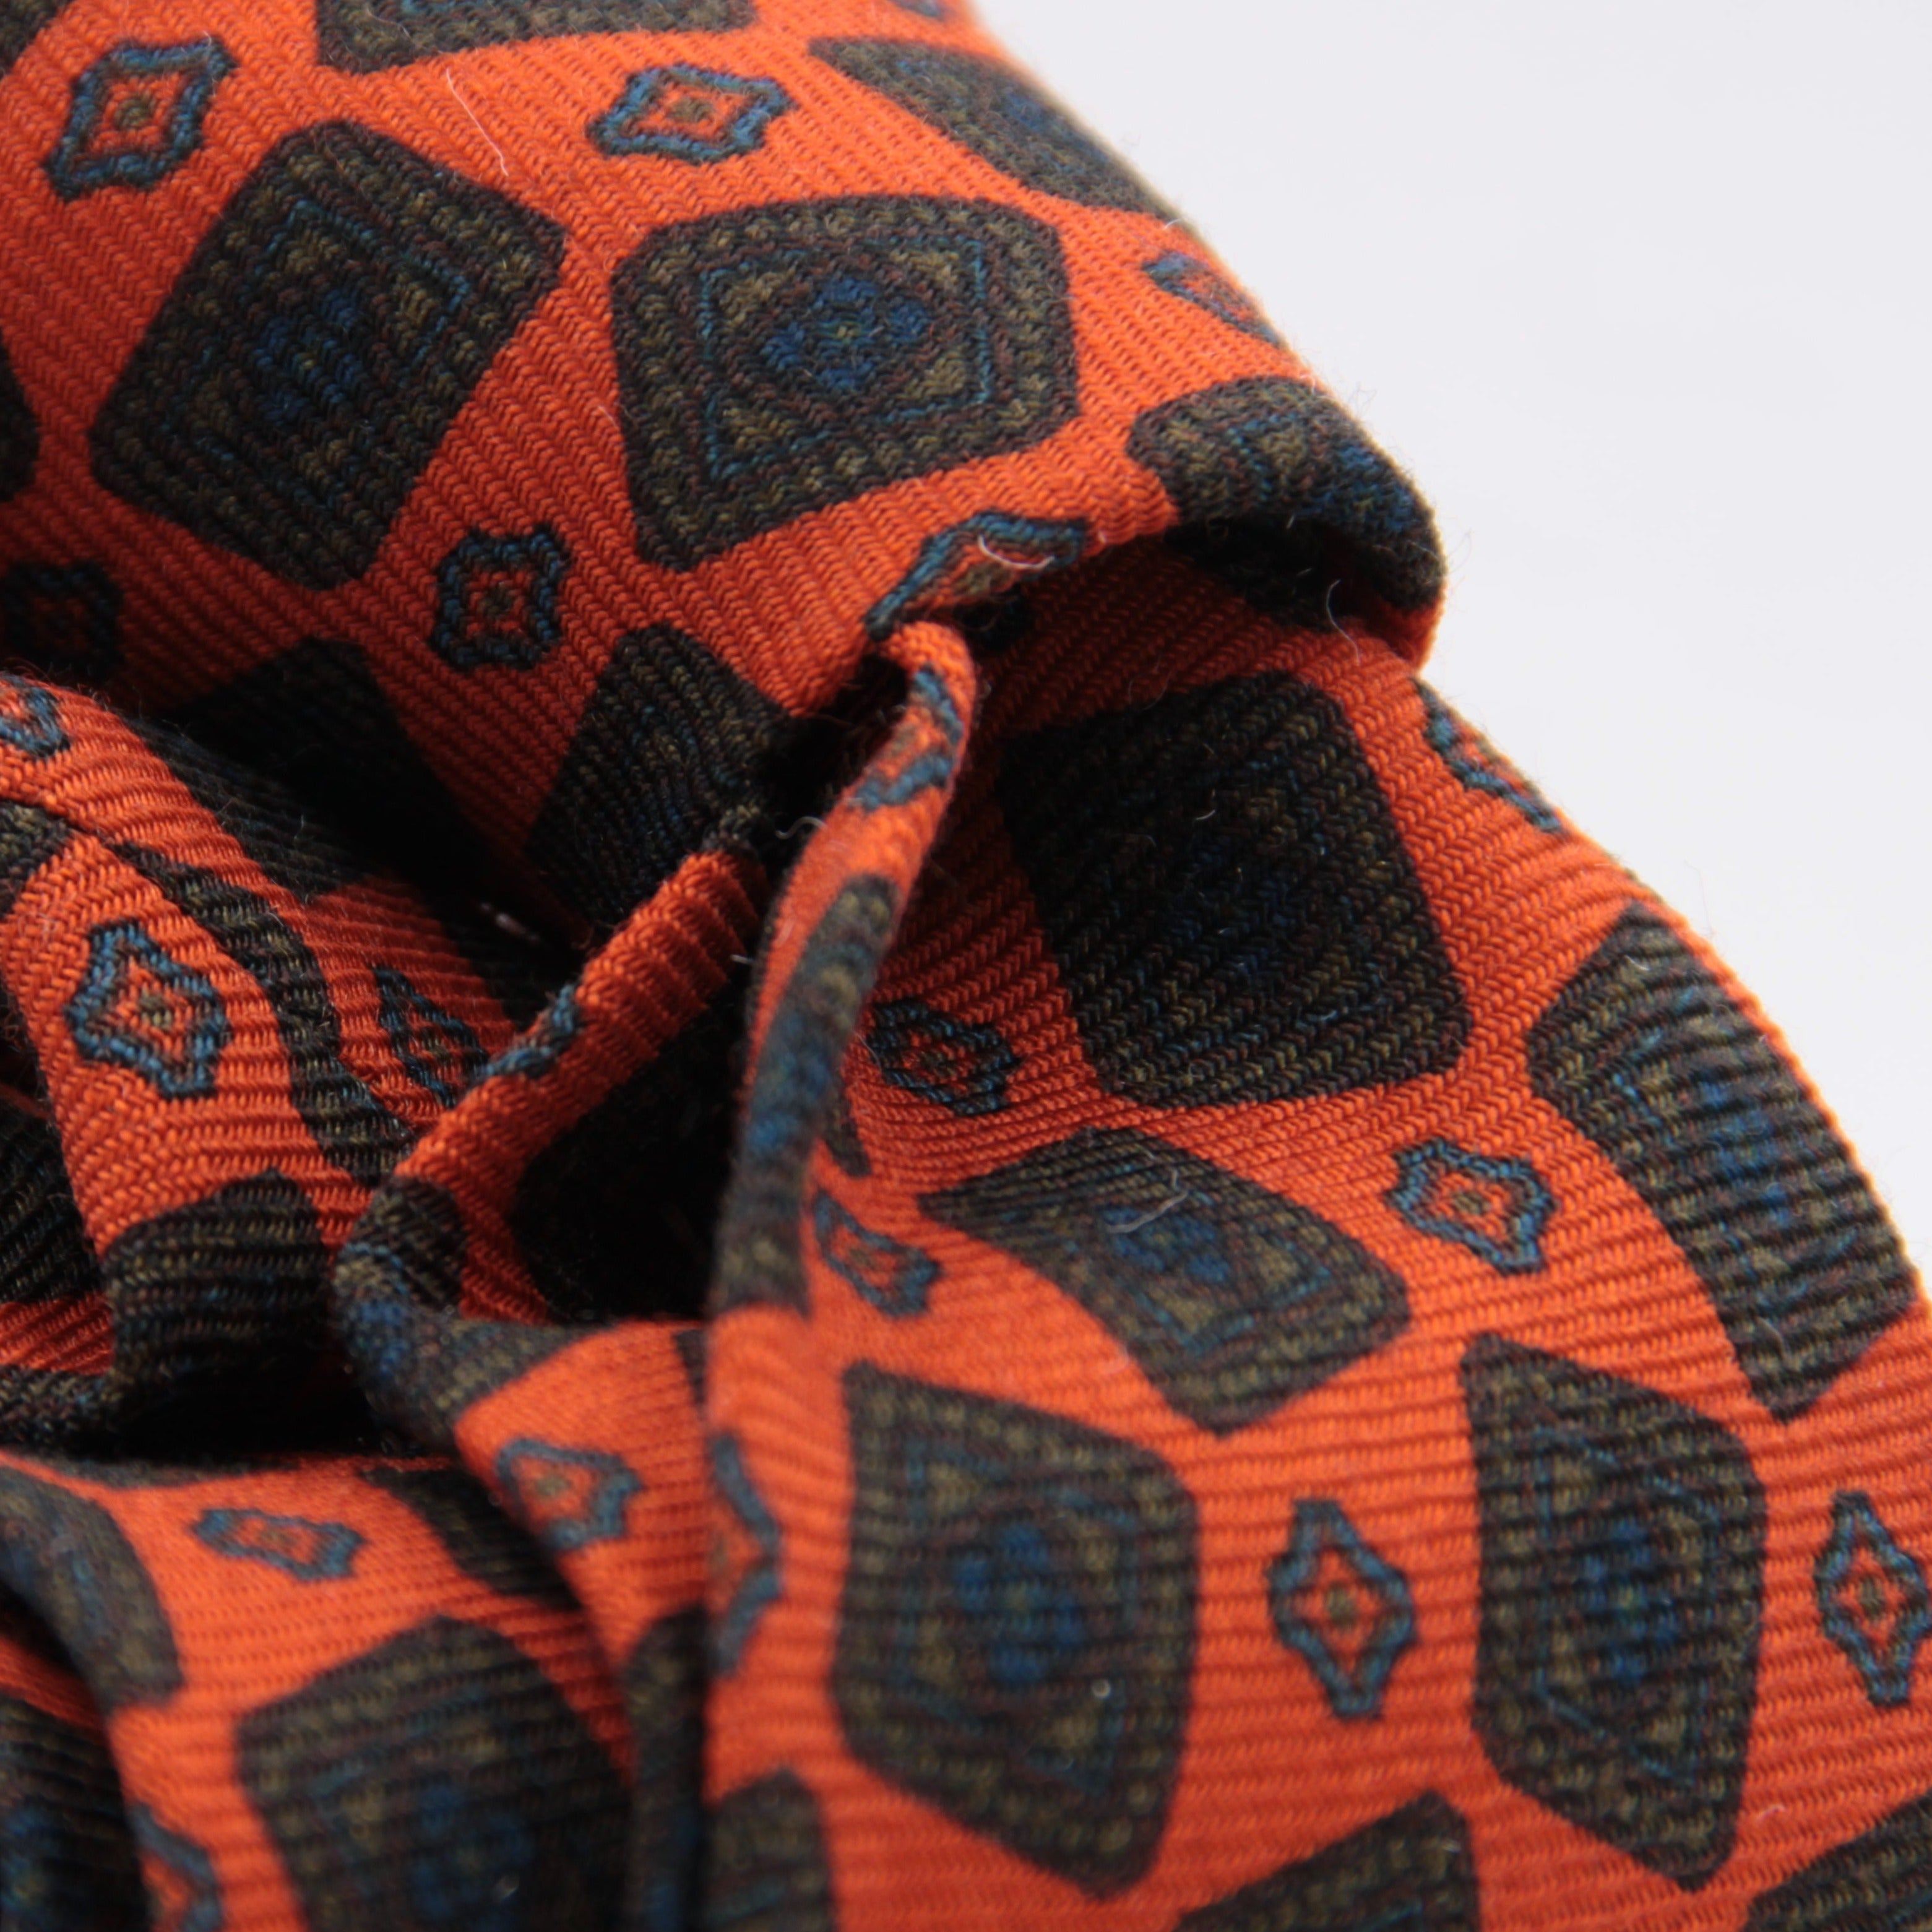 Cruciani & Bella 100%  Printed Wool  Unlined Hand rolled blades Orange, Green and Blue Motif Tie Handmade in Italy 8 cm x 150 cm #5990